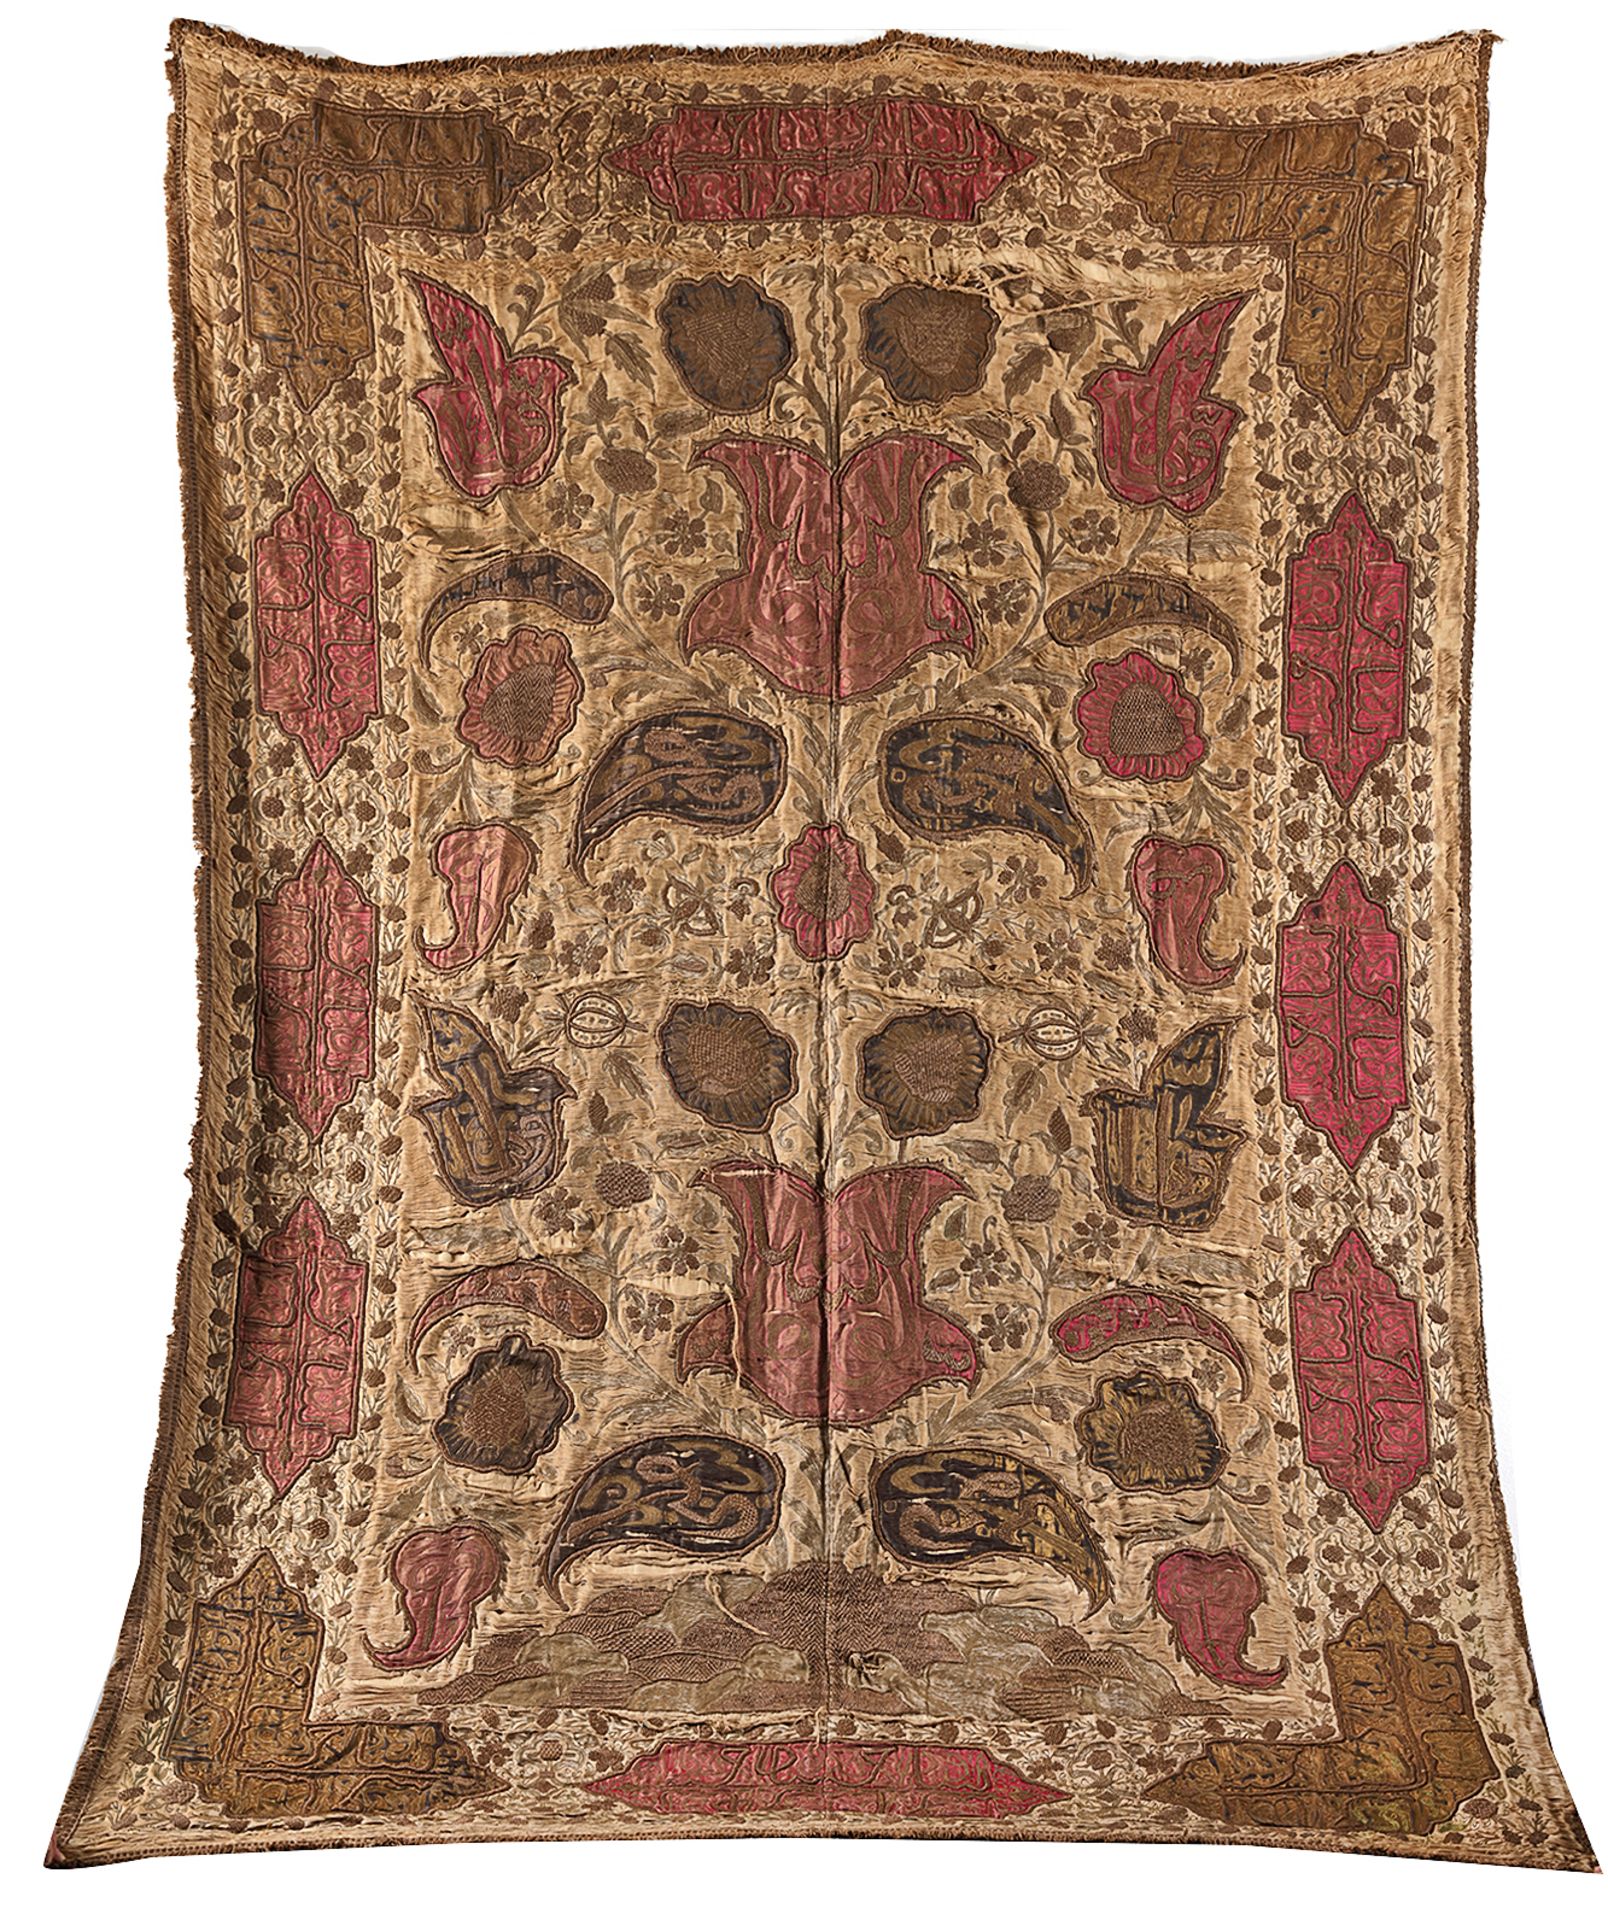 A LARGE OTTOMAN EMBROIDERED HANGING PANEL